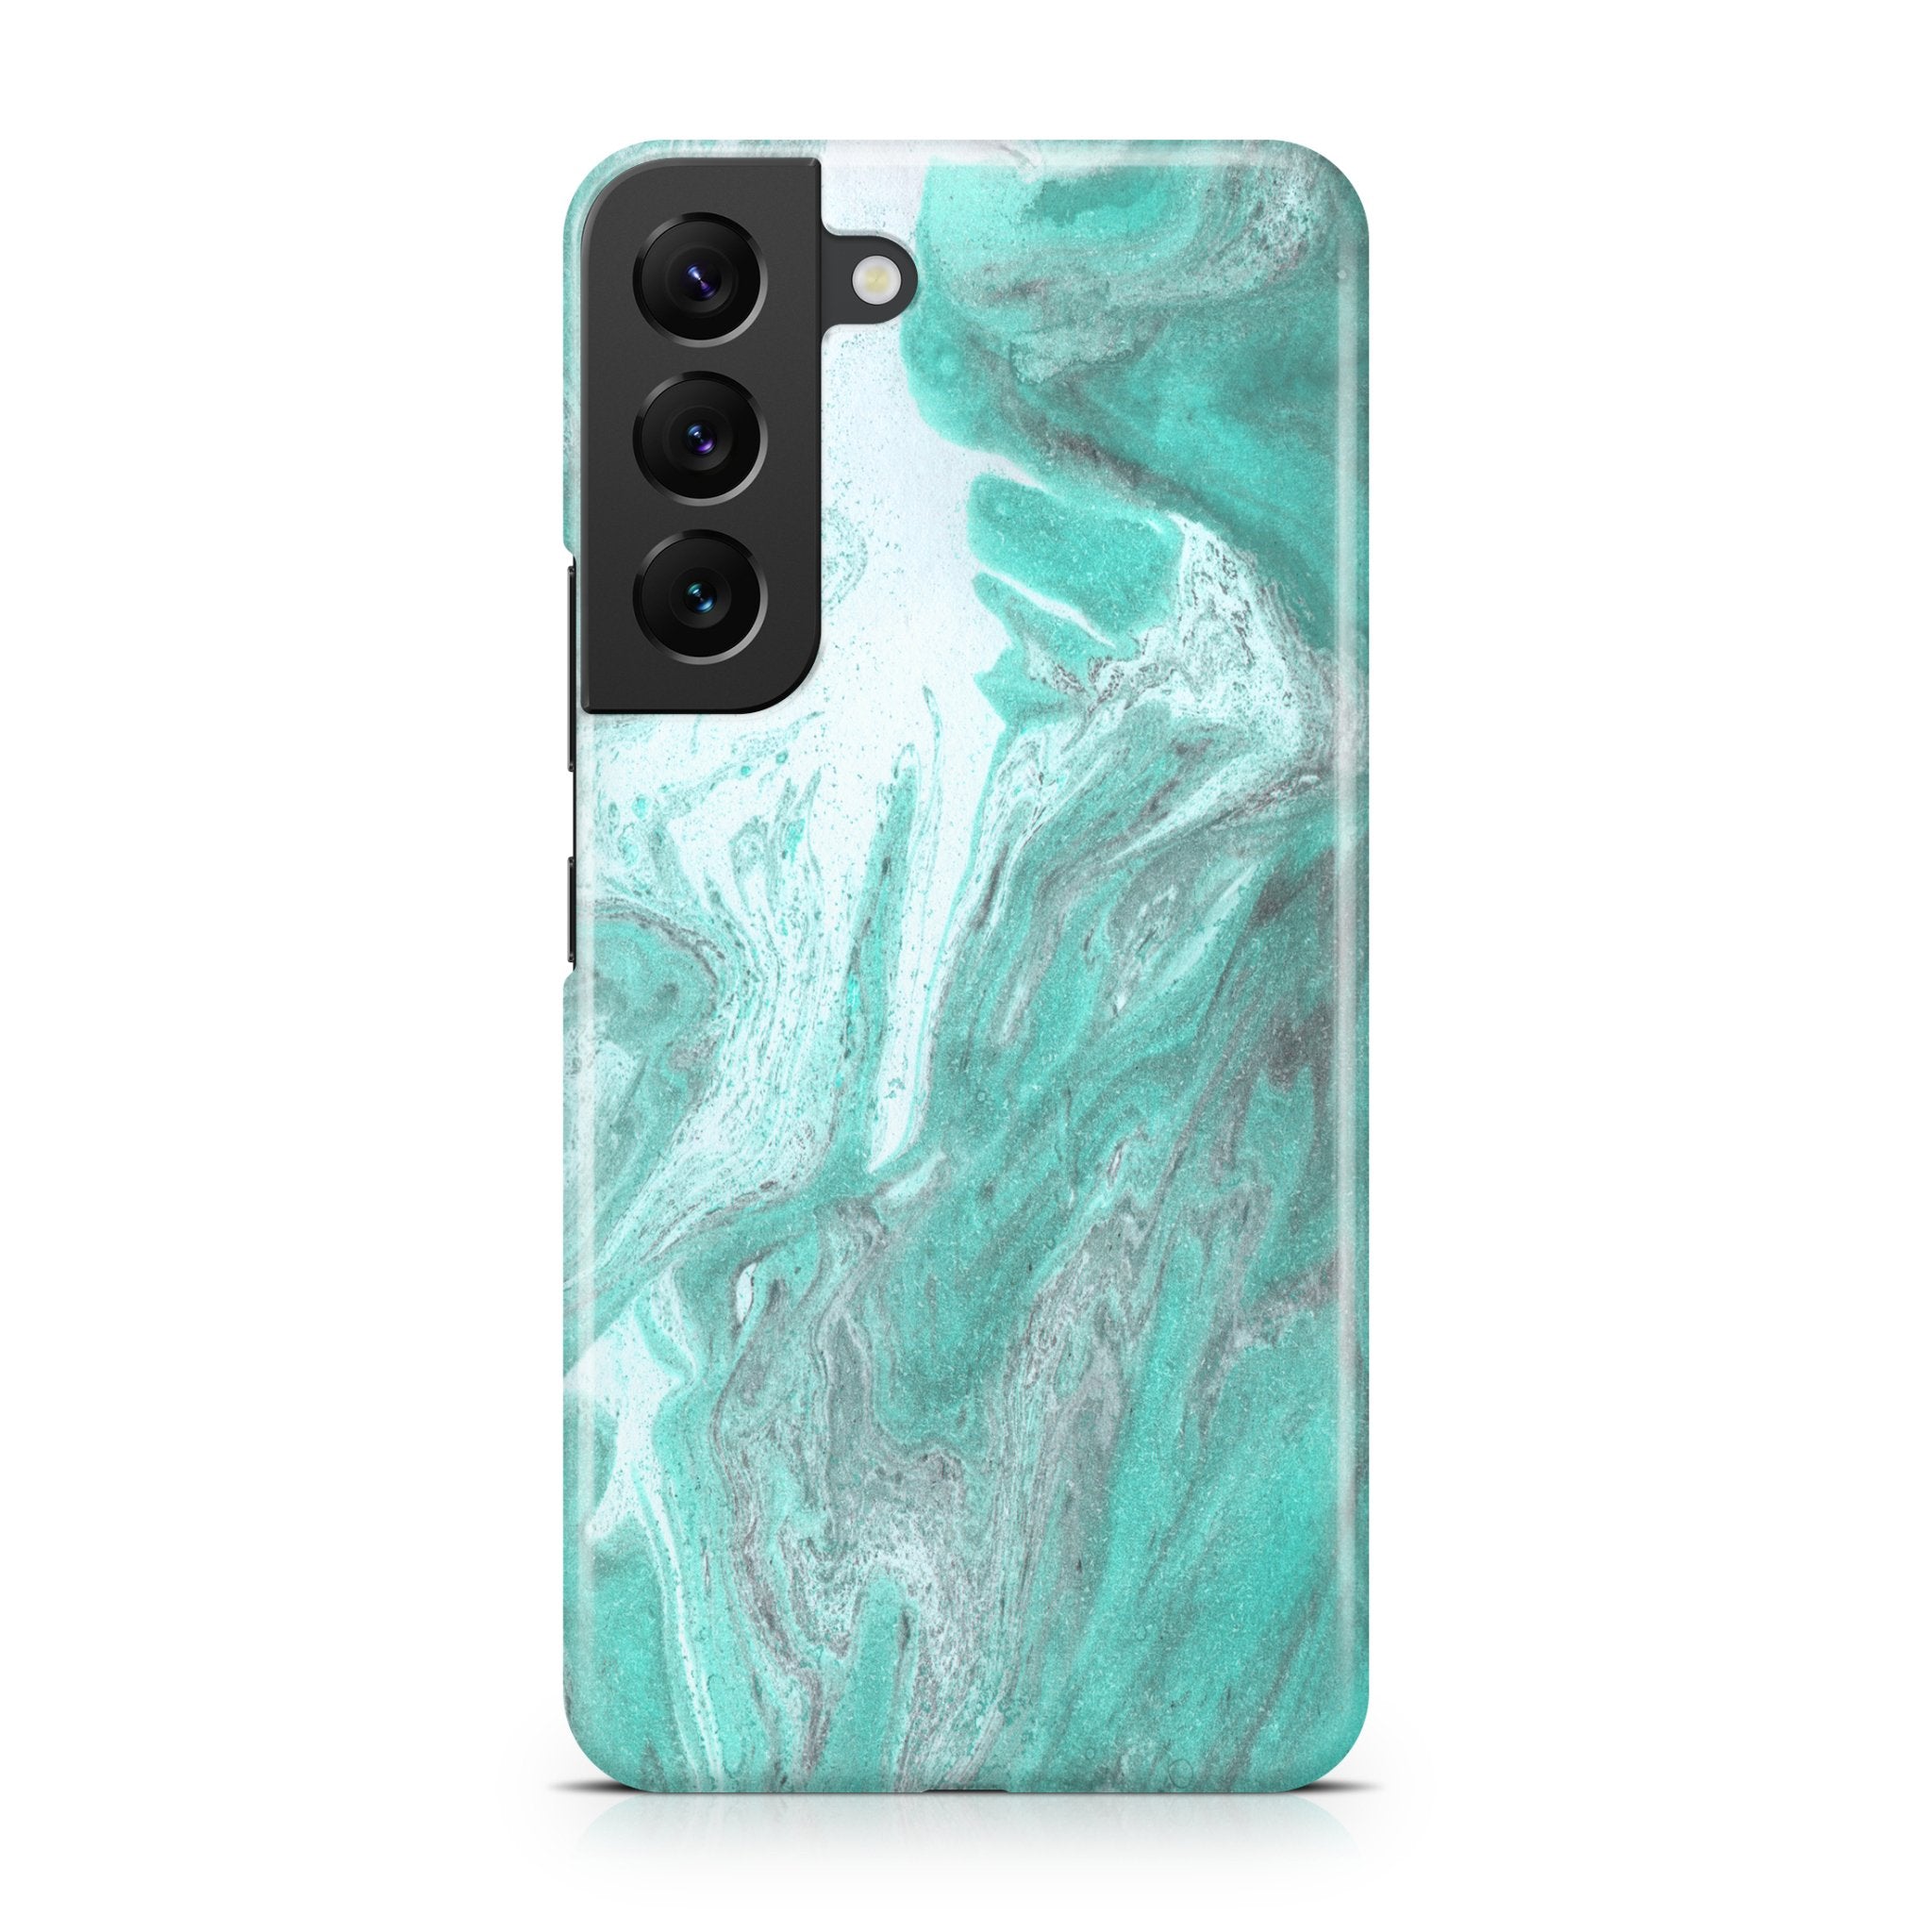 Aqua Green Marble - Samsung phone case designs by CaseSwagger